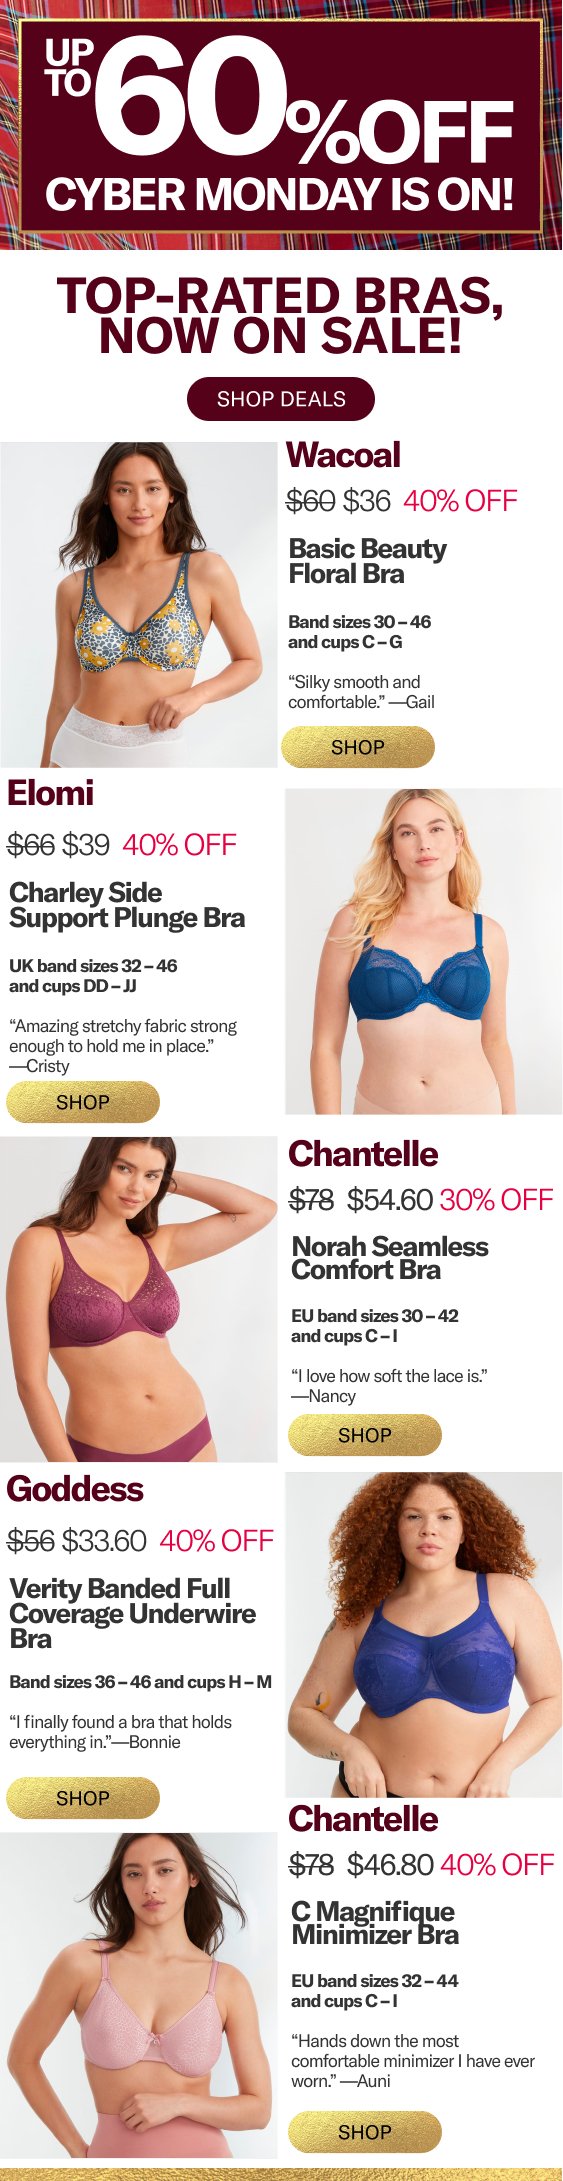 Top Picks, Top Discounts: 60% Off Our Most-Loved Bras - Bare Necessities